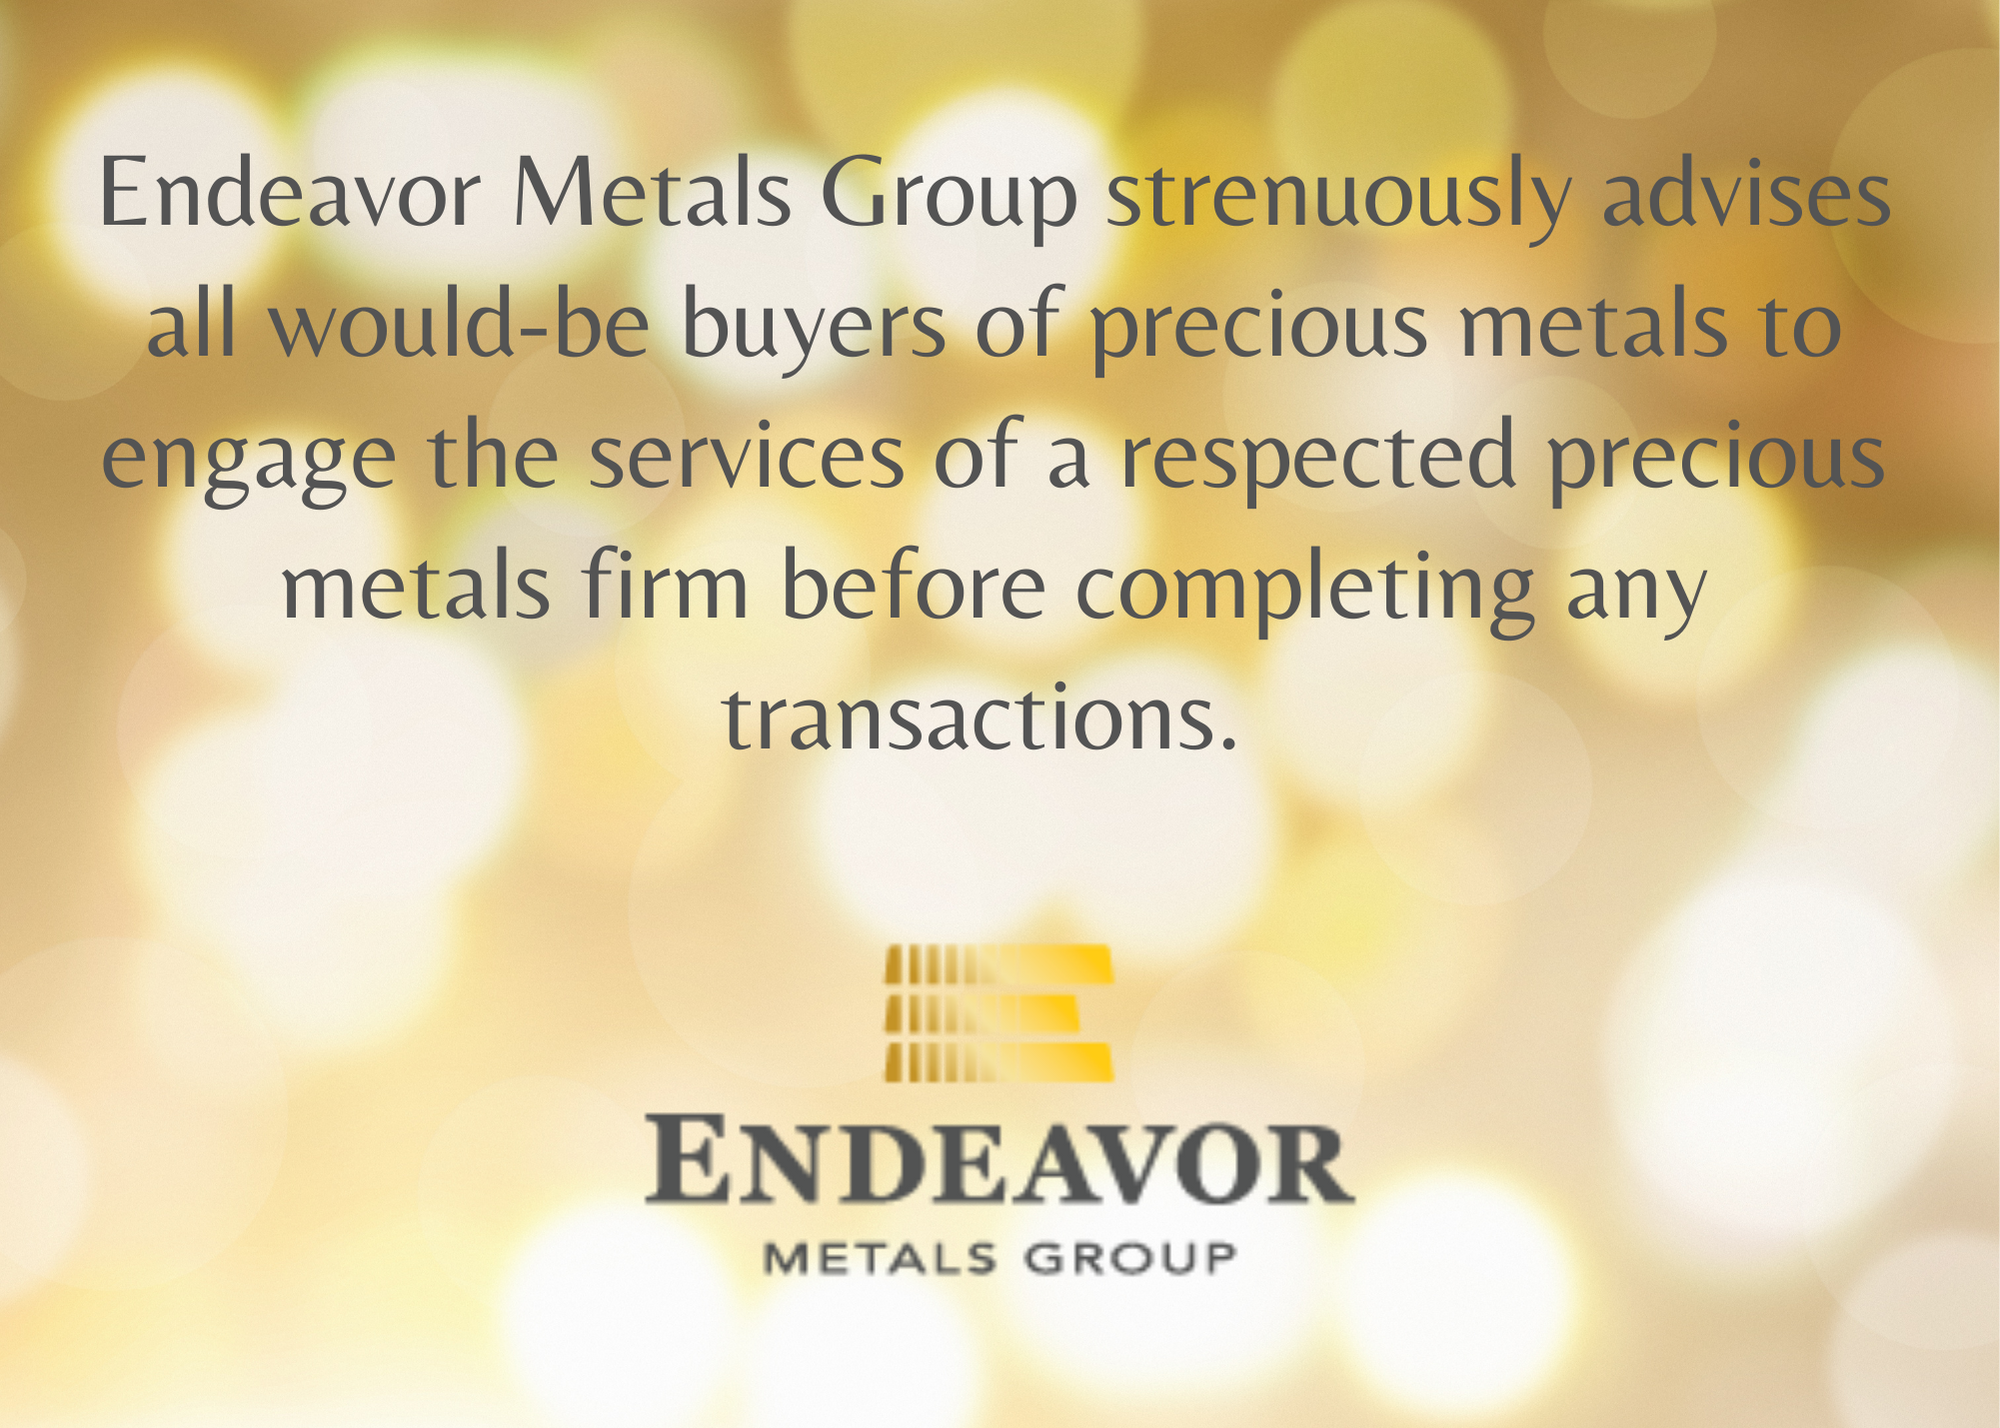 Endeavor Metals Group, Tuesday, March 15, 2022, Press release picture